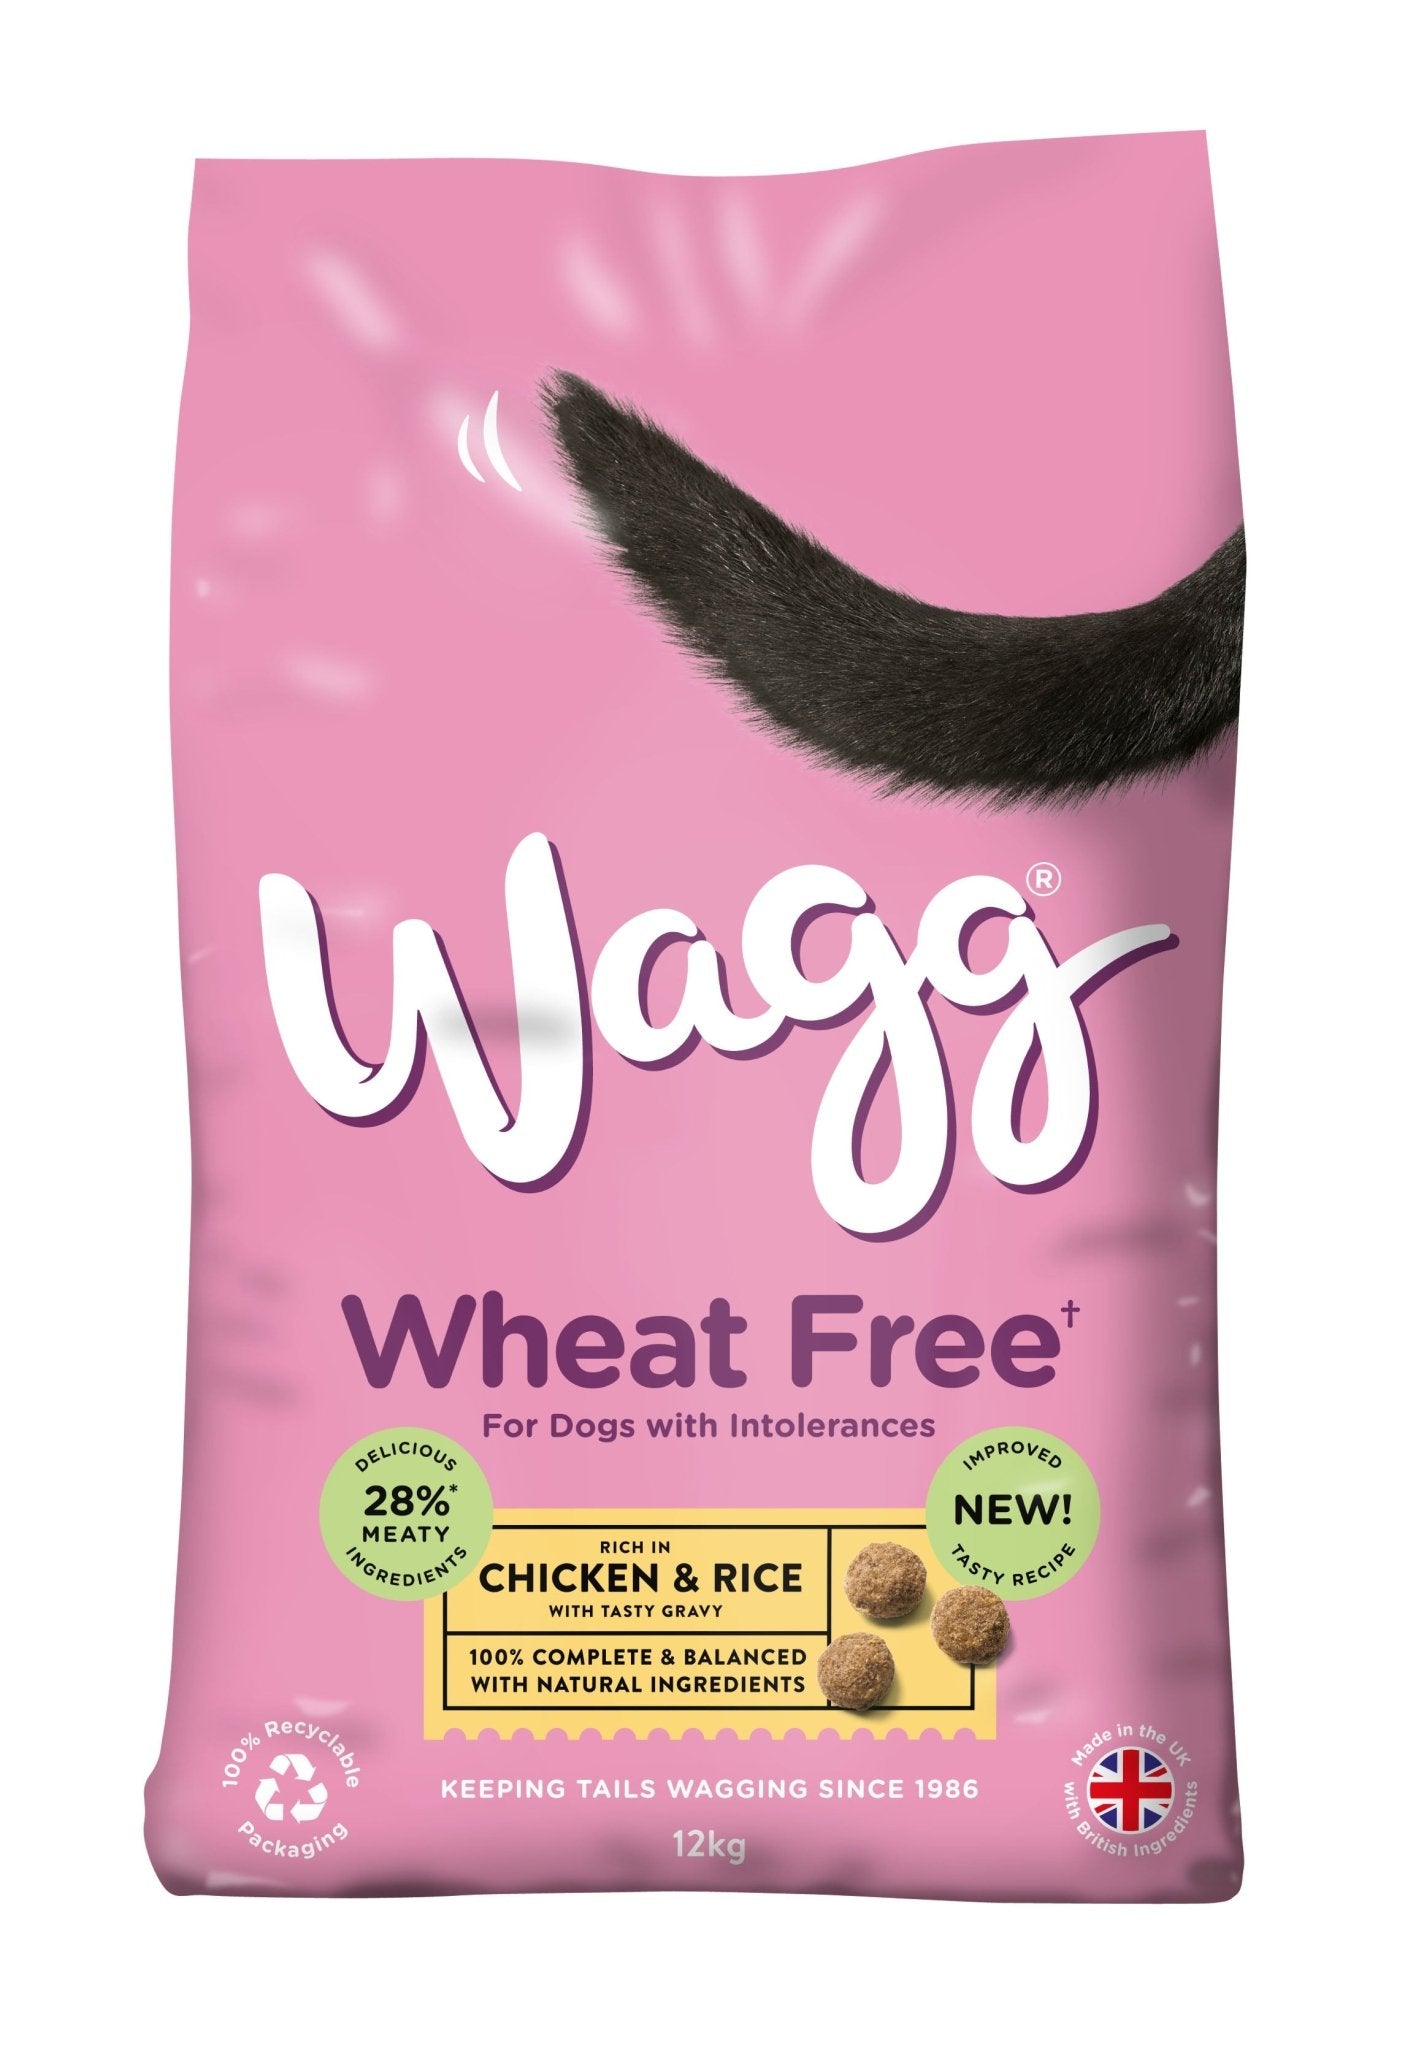 Wagg Wheat Free Complete Chicken and Rice, Wagg, 12 kg